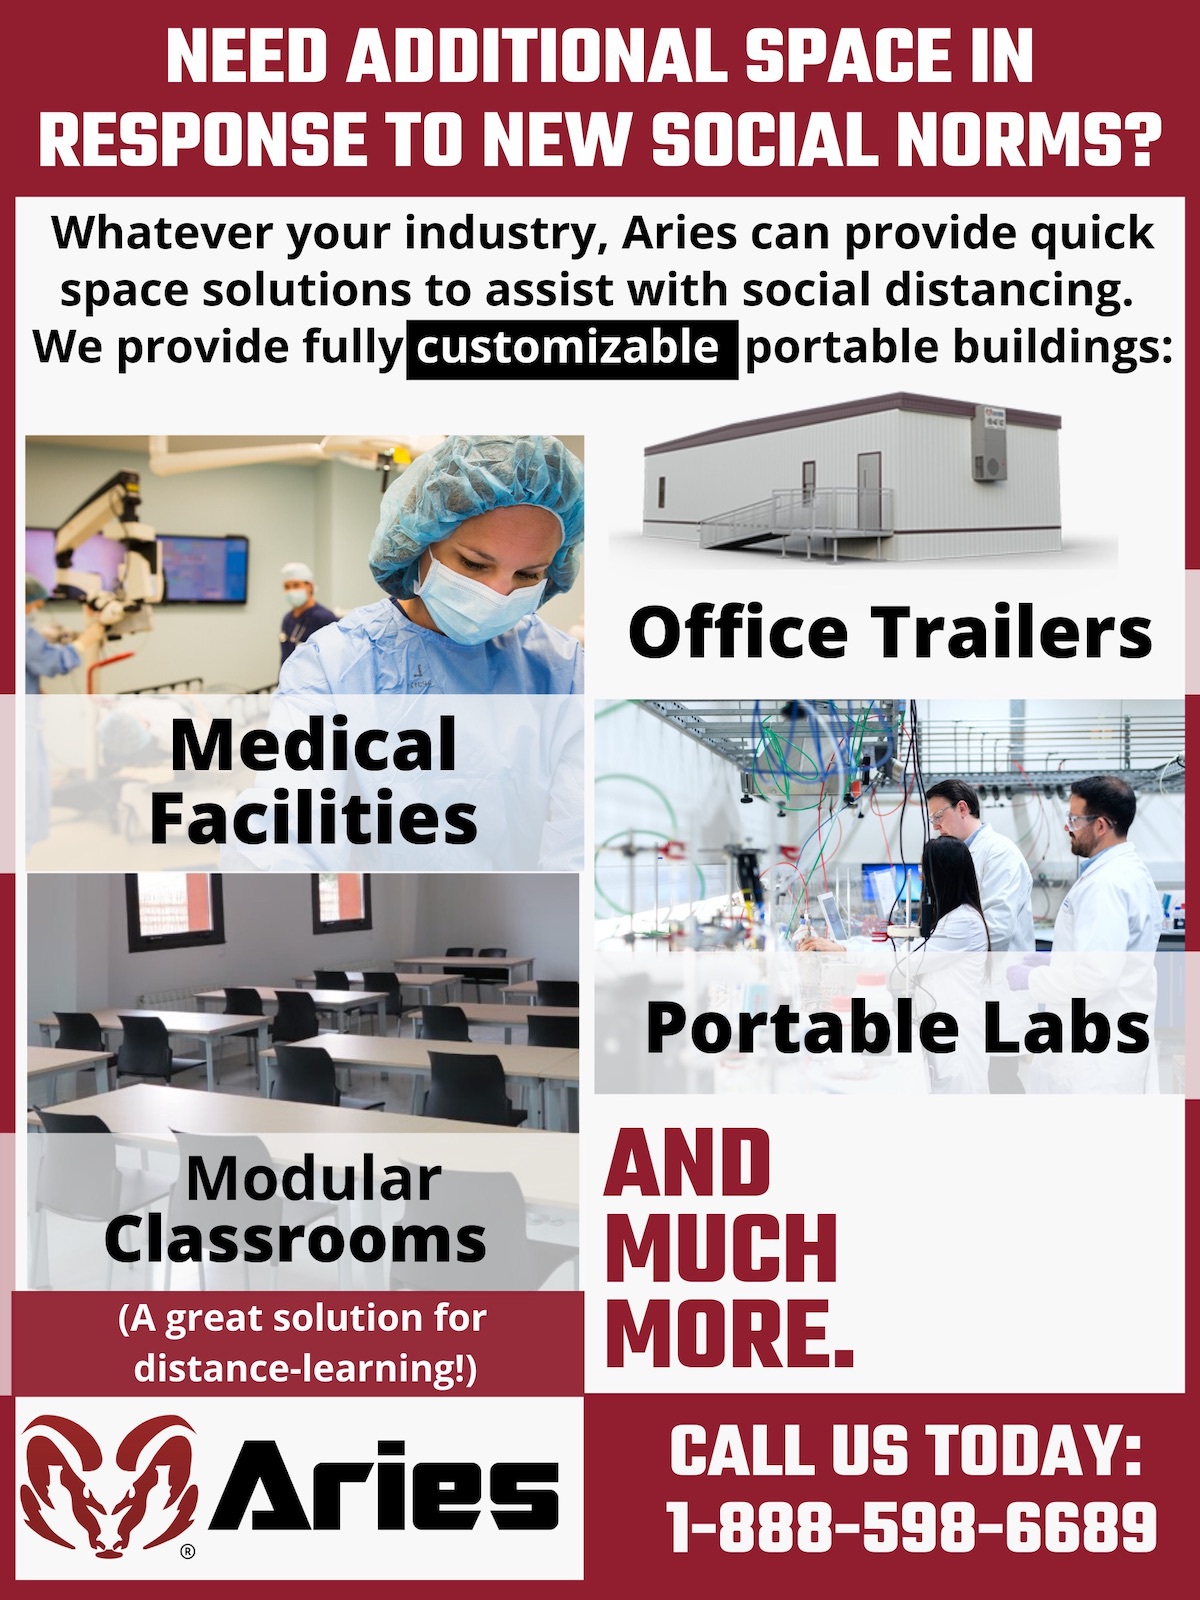 An infographic comprised mostly of Aries’ company colors; burgundy, black and white, featuring images depicting medical facilities, office trailers, portable labs, and modular classrooms with Aries’ phone number (1-888-598-6689) and a headline that reads, “Need Additional Space In Response to New Social Norms? Aries Can Help!”